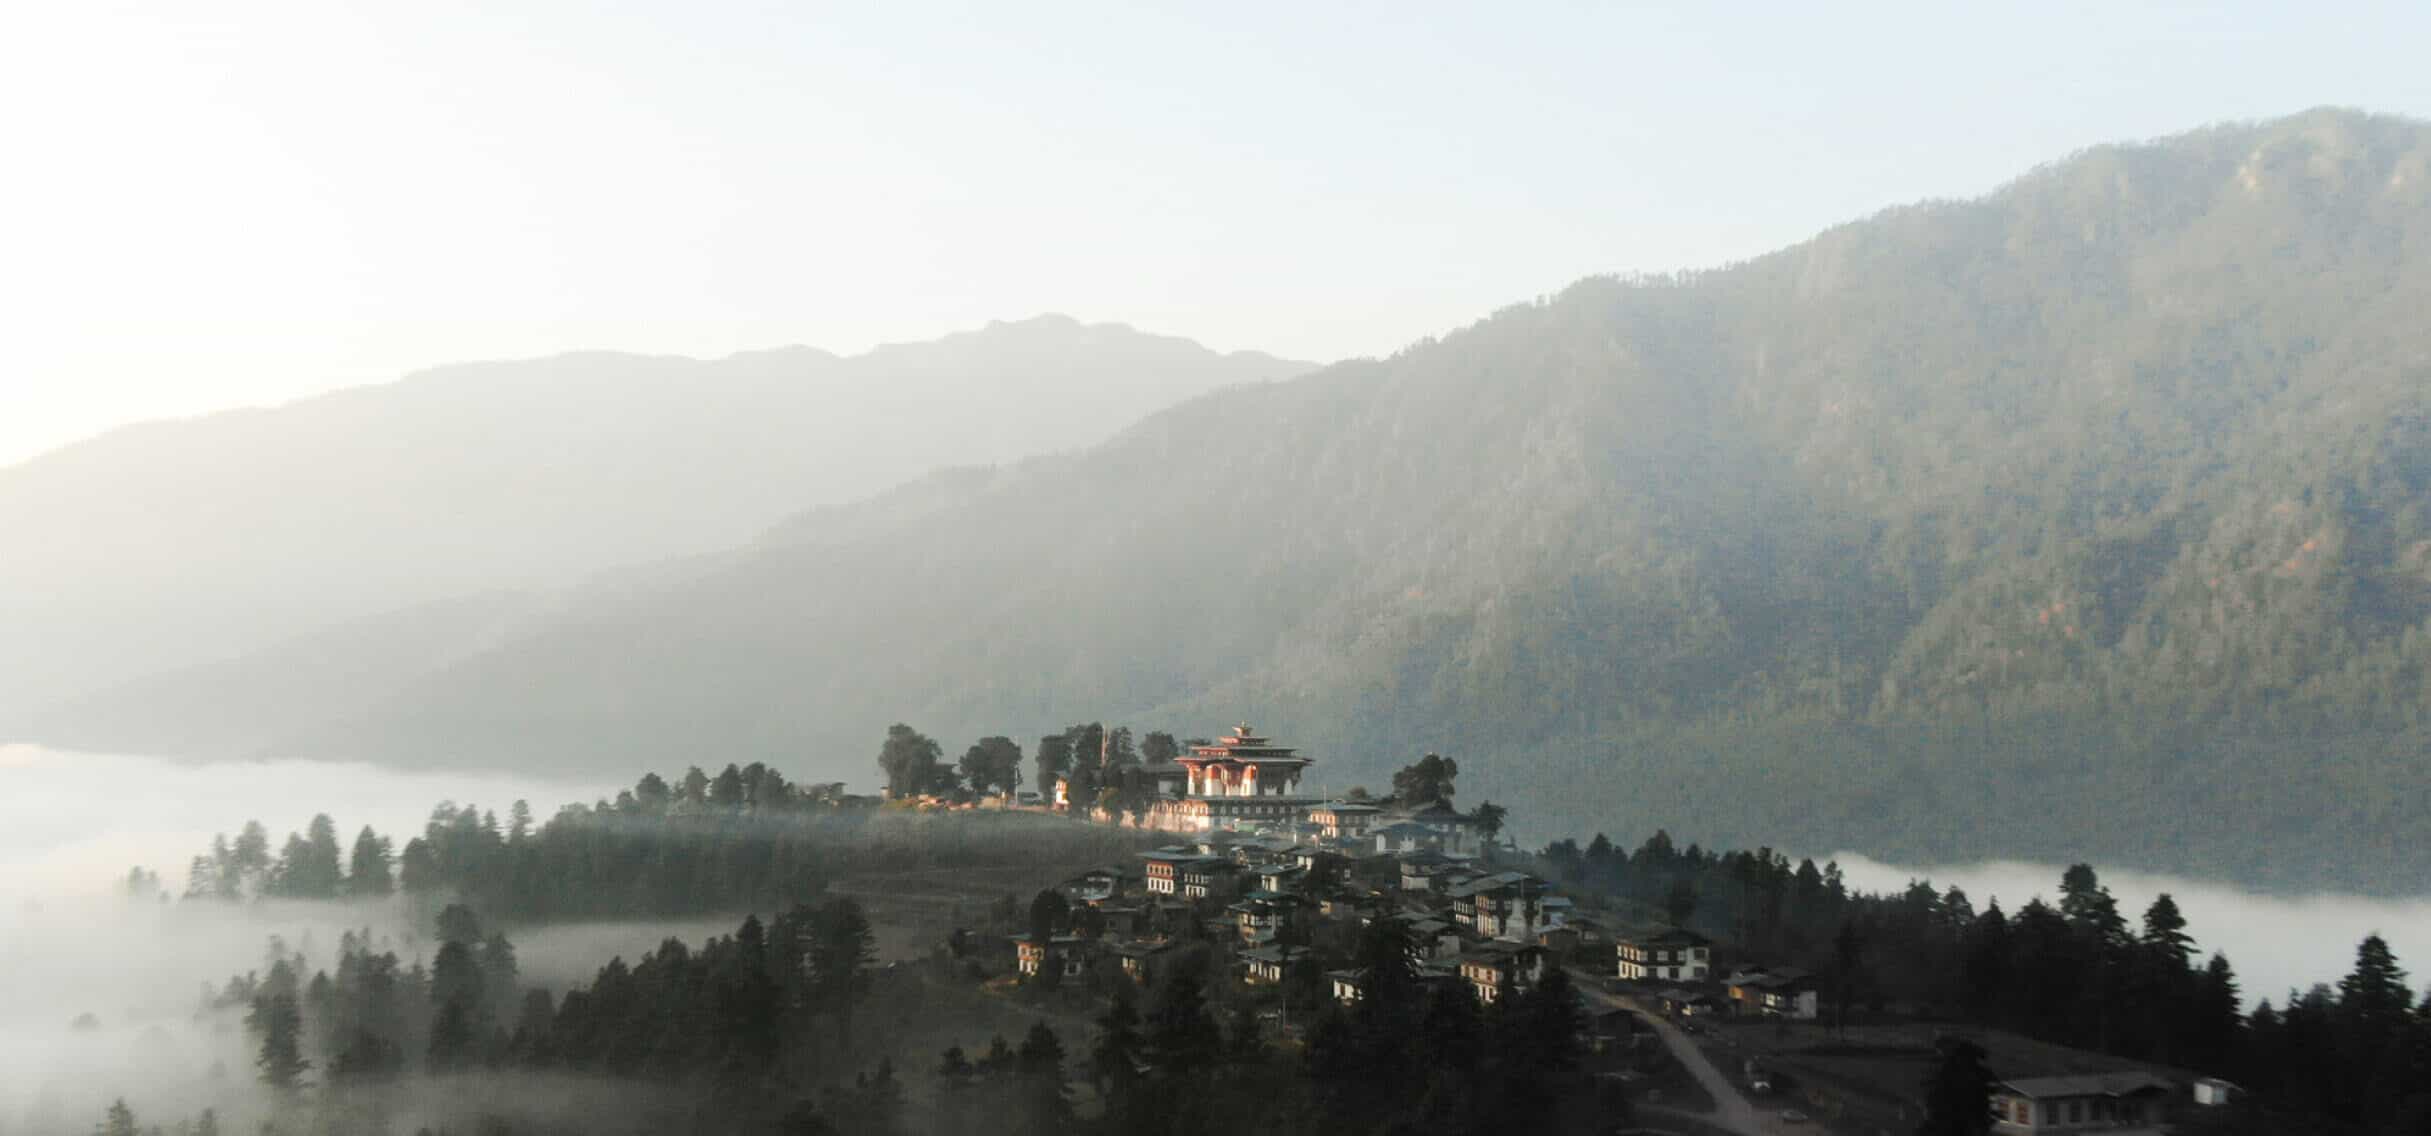 Gangtey Village View From Above the Clouds